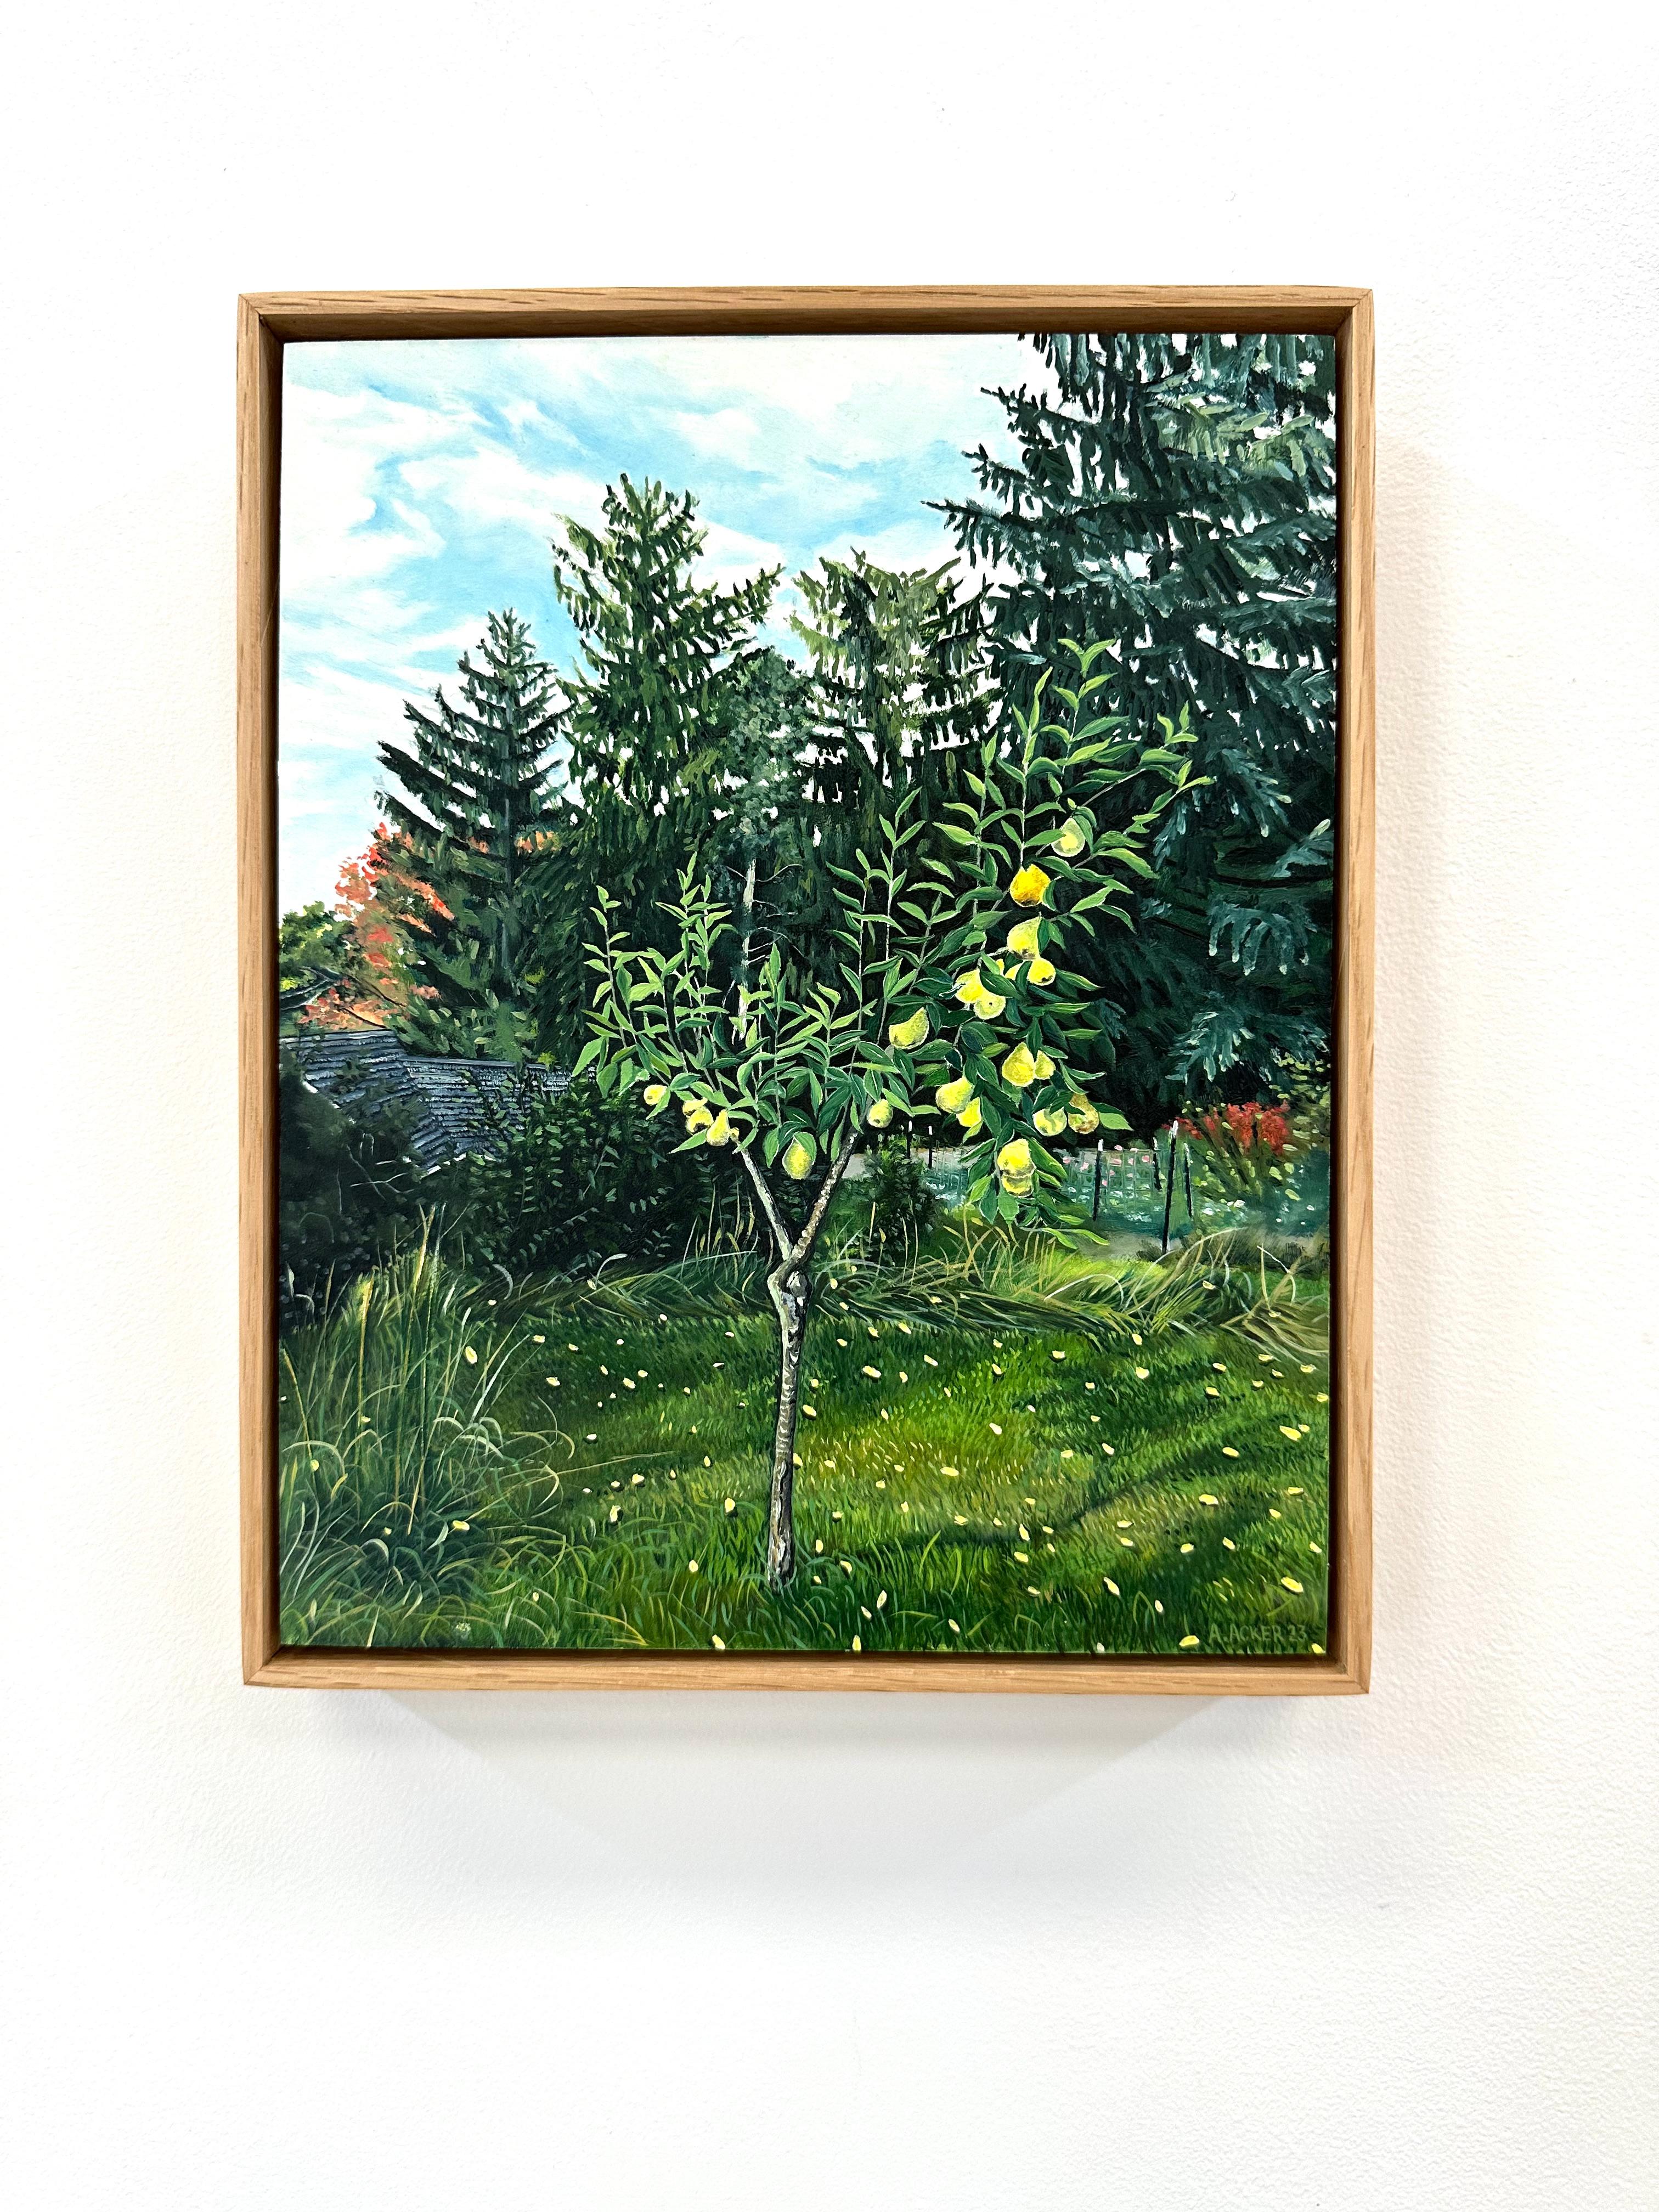 Backyard Pear, Yellow Fruit, Green Leaves, Grass, Trees, Blue Sky Clouds, Garden - Painting by Amanda Acker